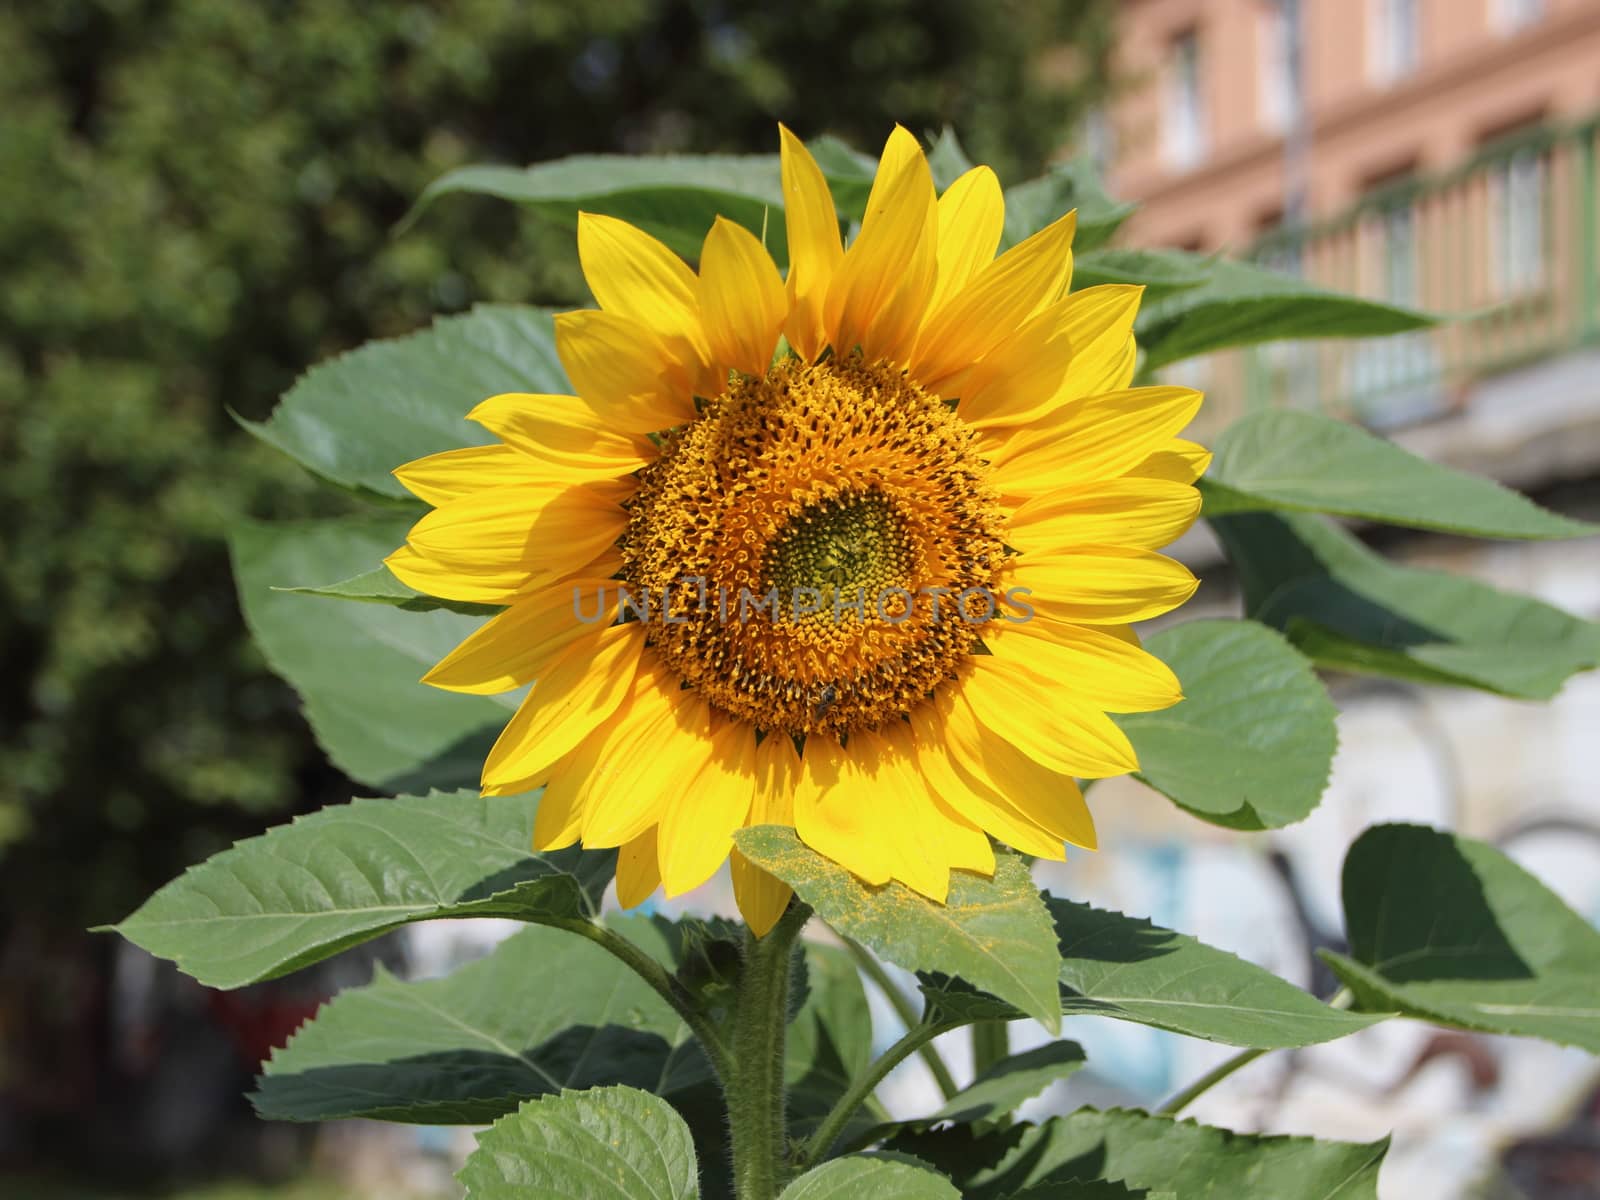 Yellow Sunflower and Leaves with Urban Apartment Background by HoleInTheBox